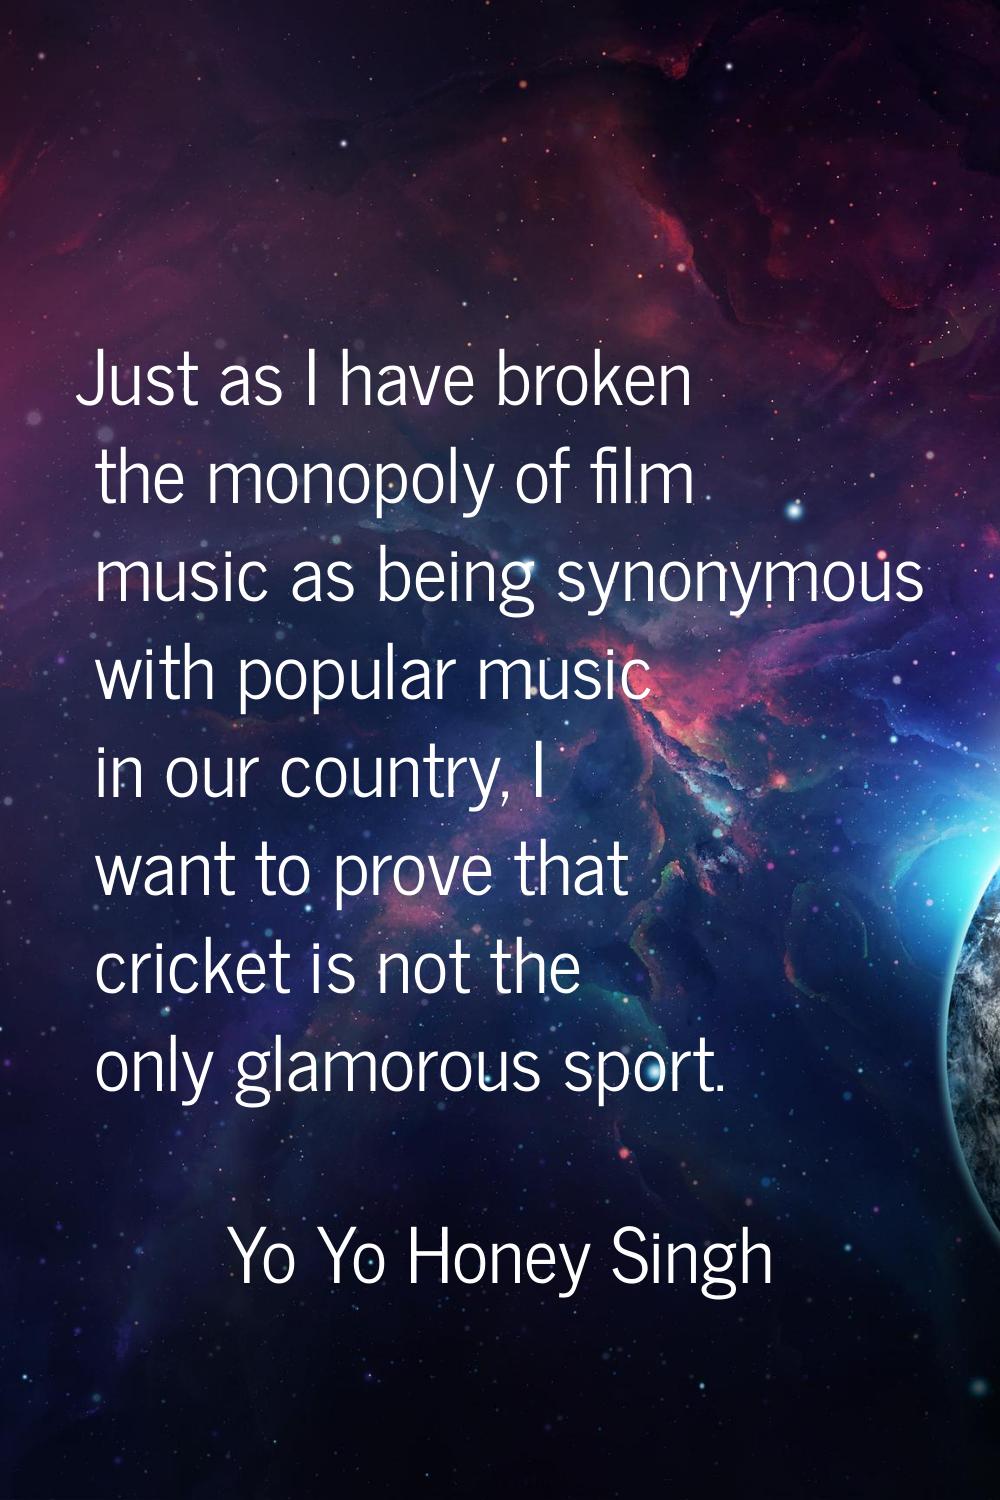 Just as I have broken the monopoly of film music as being synonymous with popular music in our coun